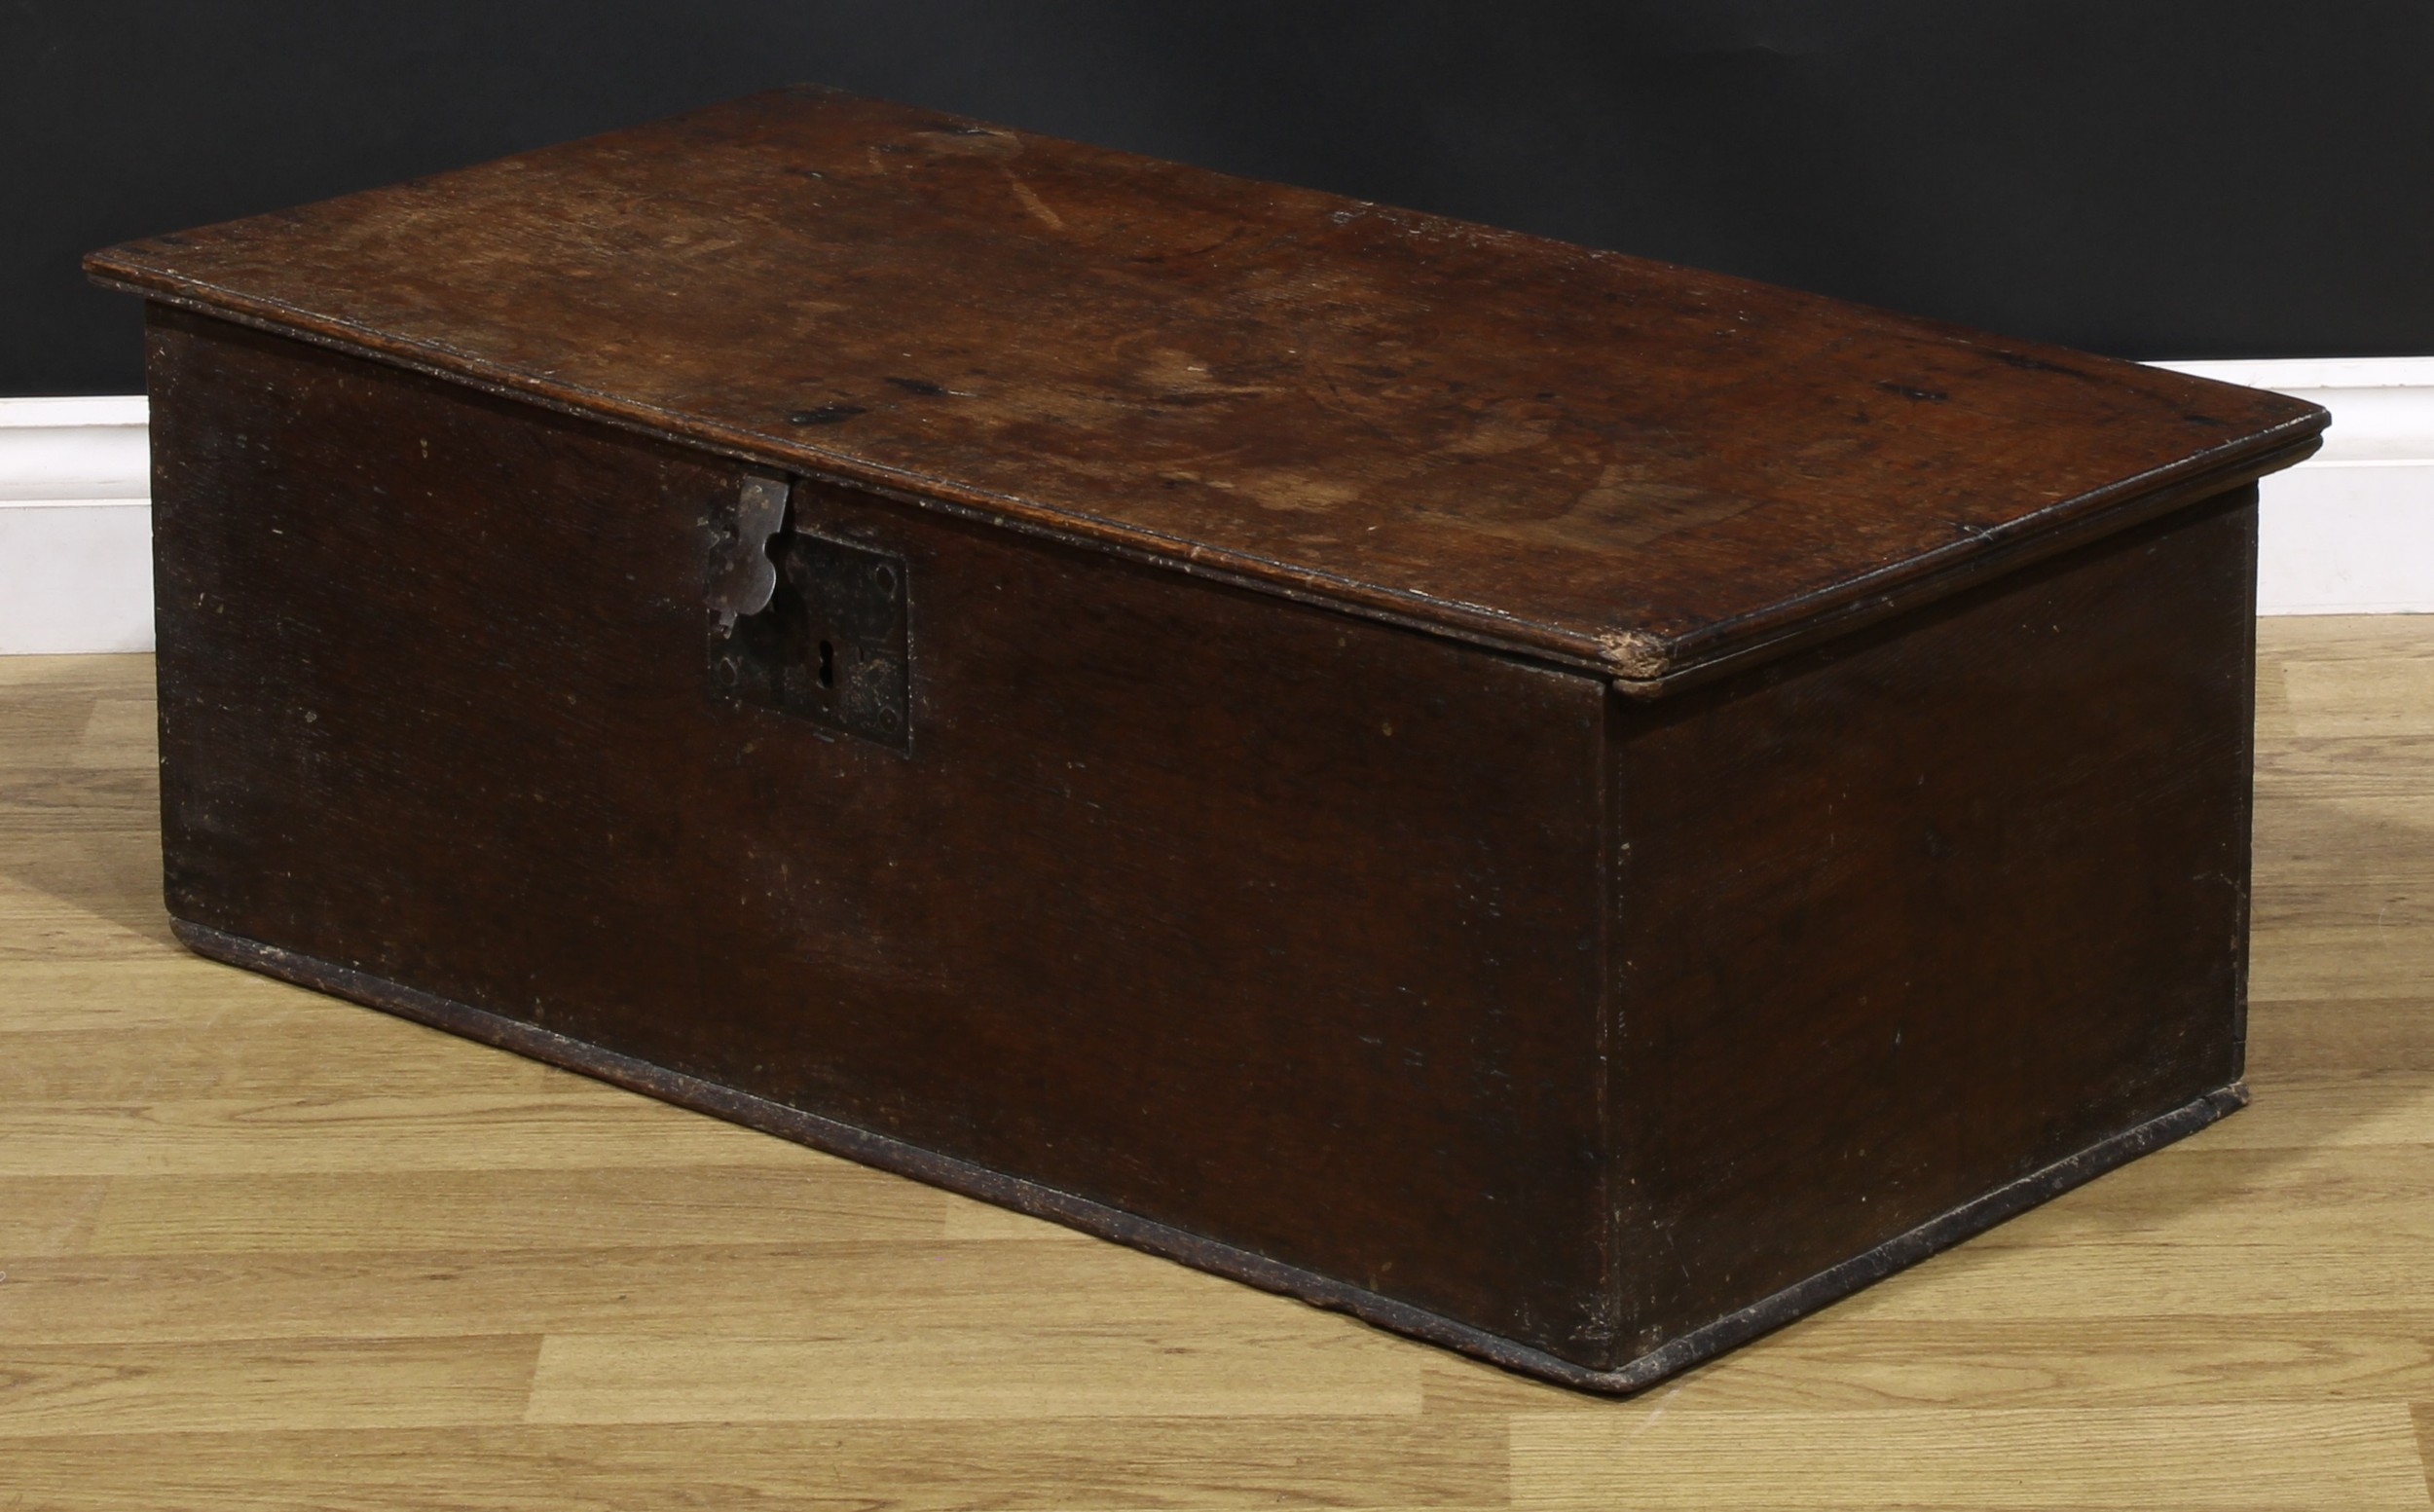 An 18th century oak six-plank boarded table box, hinged top, iron hasp and lock plate, 30cm high, - Image 4 of 4